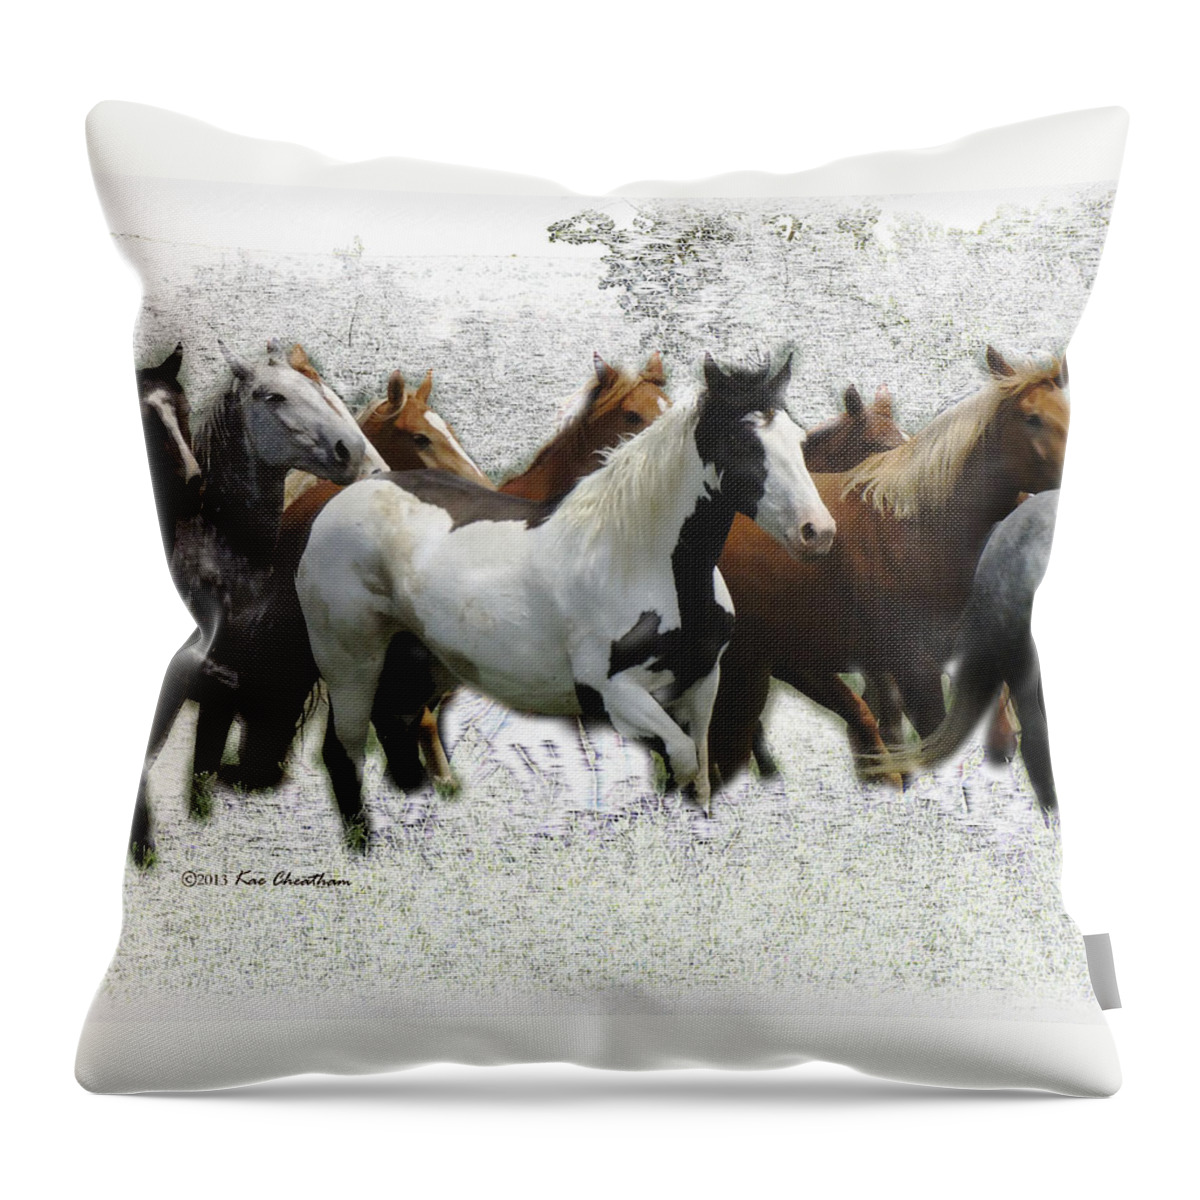 Horses Throw Pillow featuring the mixed media Horse Herd #3 by Kae Cheatham